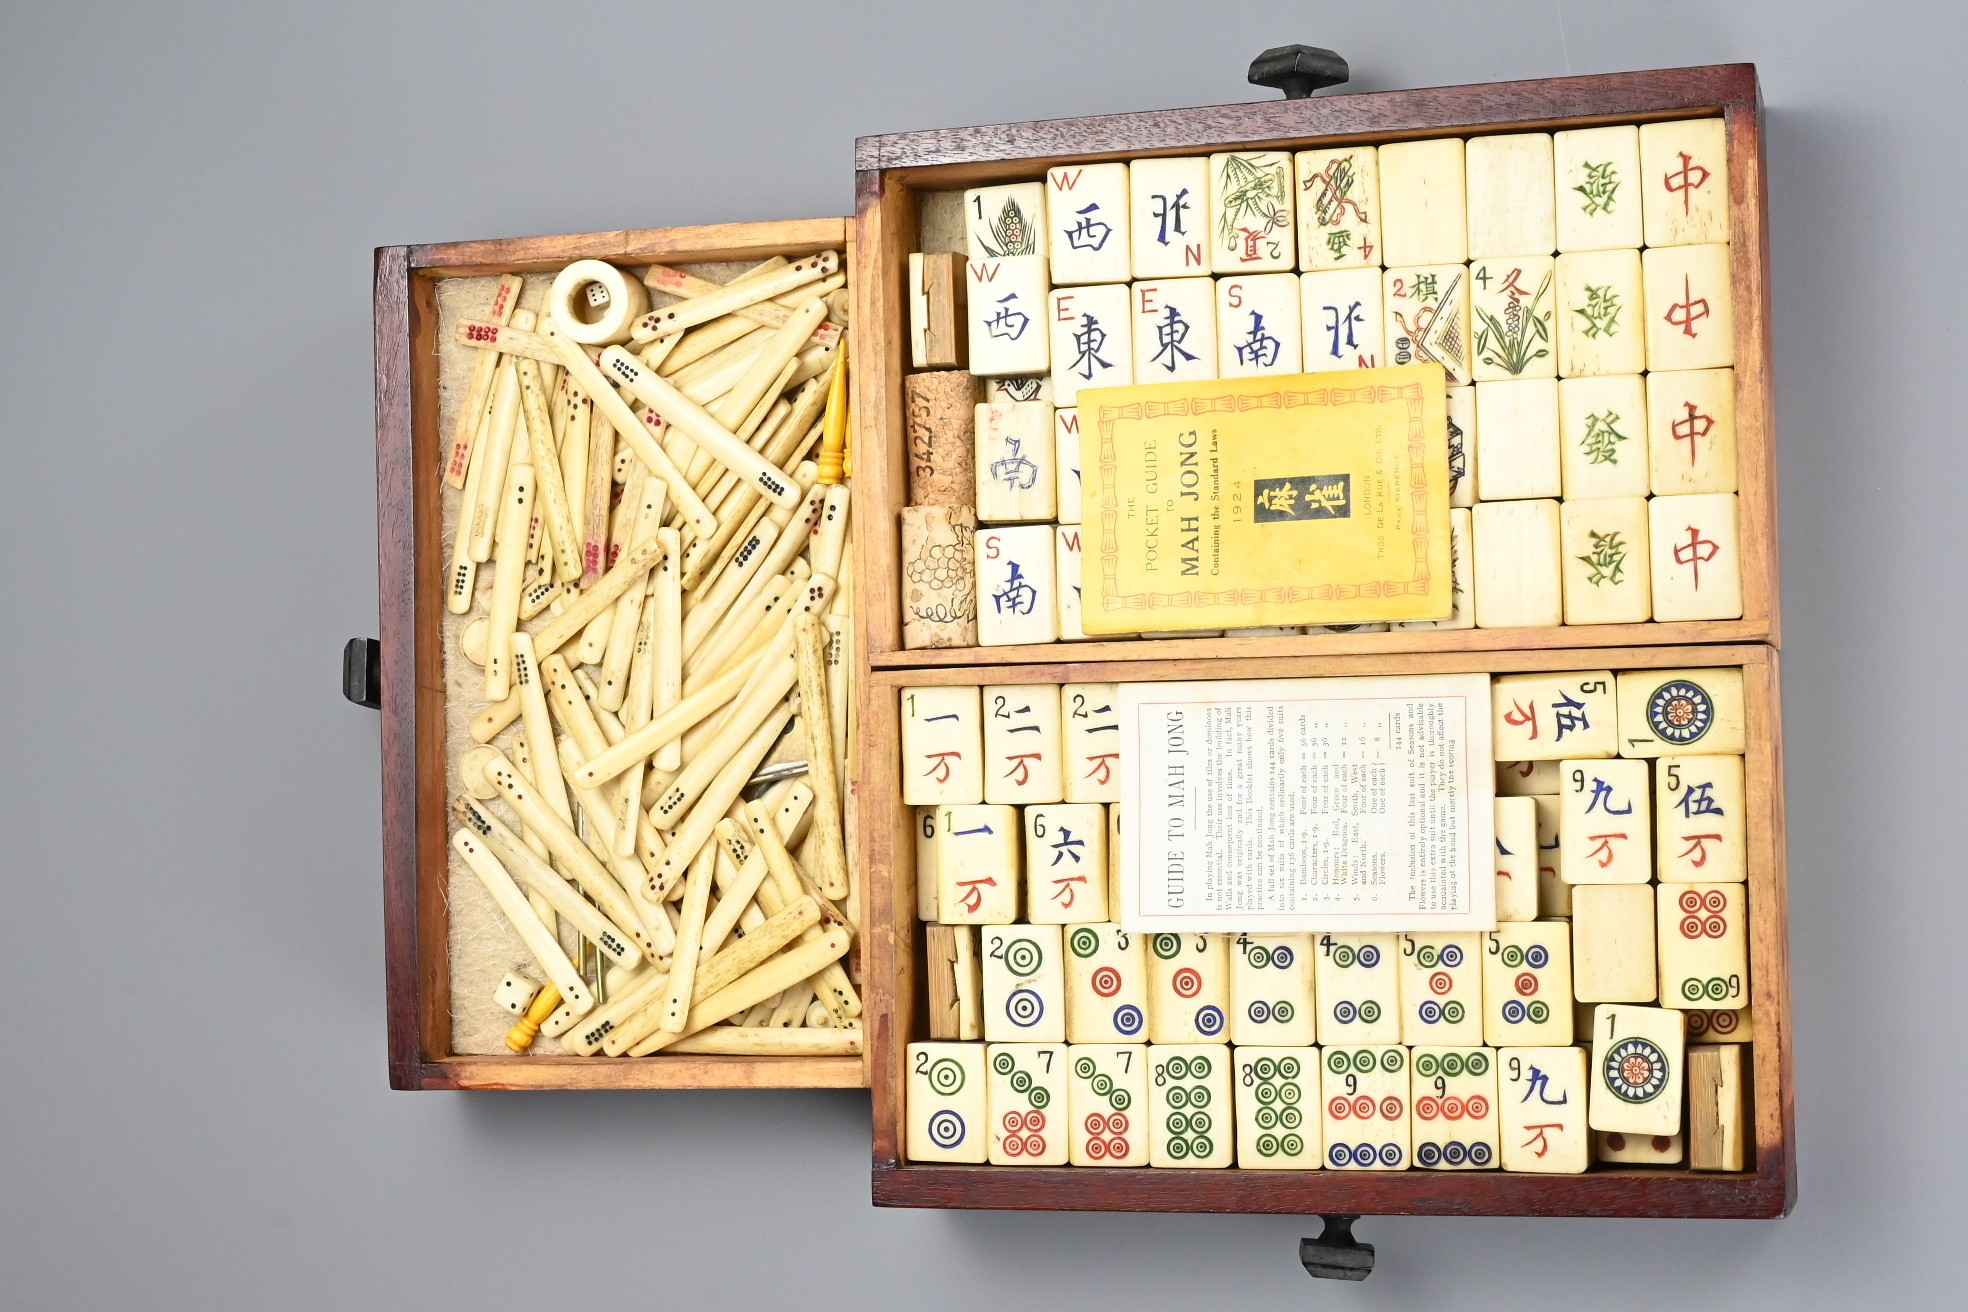 A CHINESE BOXED MAHJONG SET, EARLY 20TH CENTURY. Bone and bamboo pieces within a hardwood carrying - Image 7 of 8